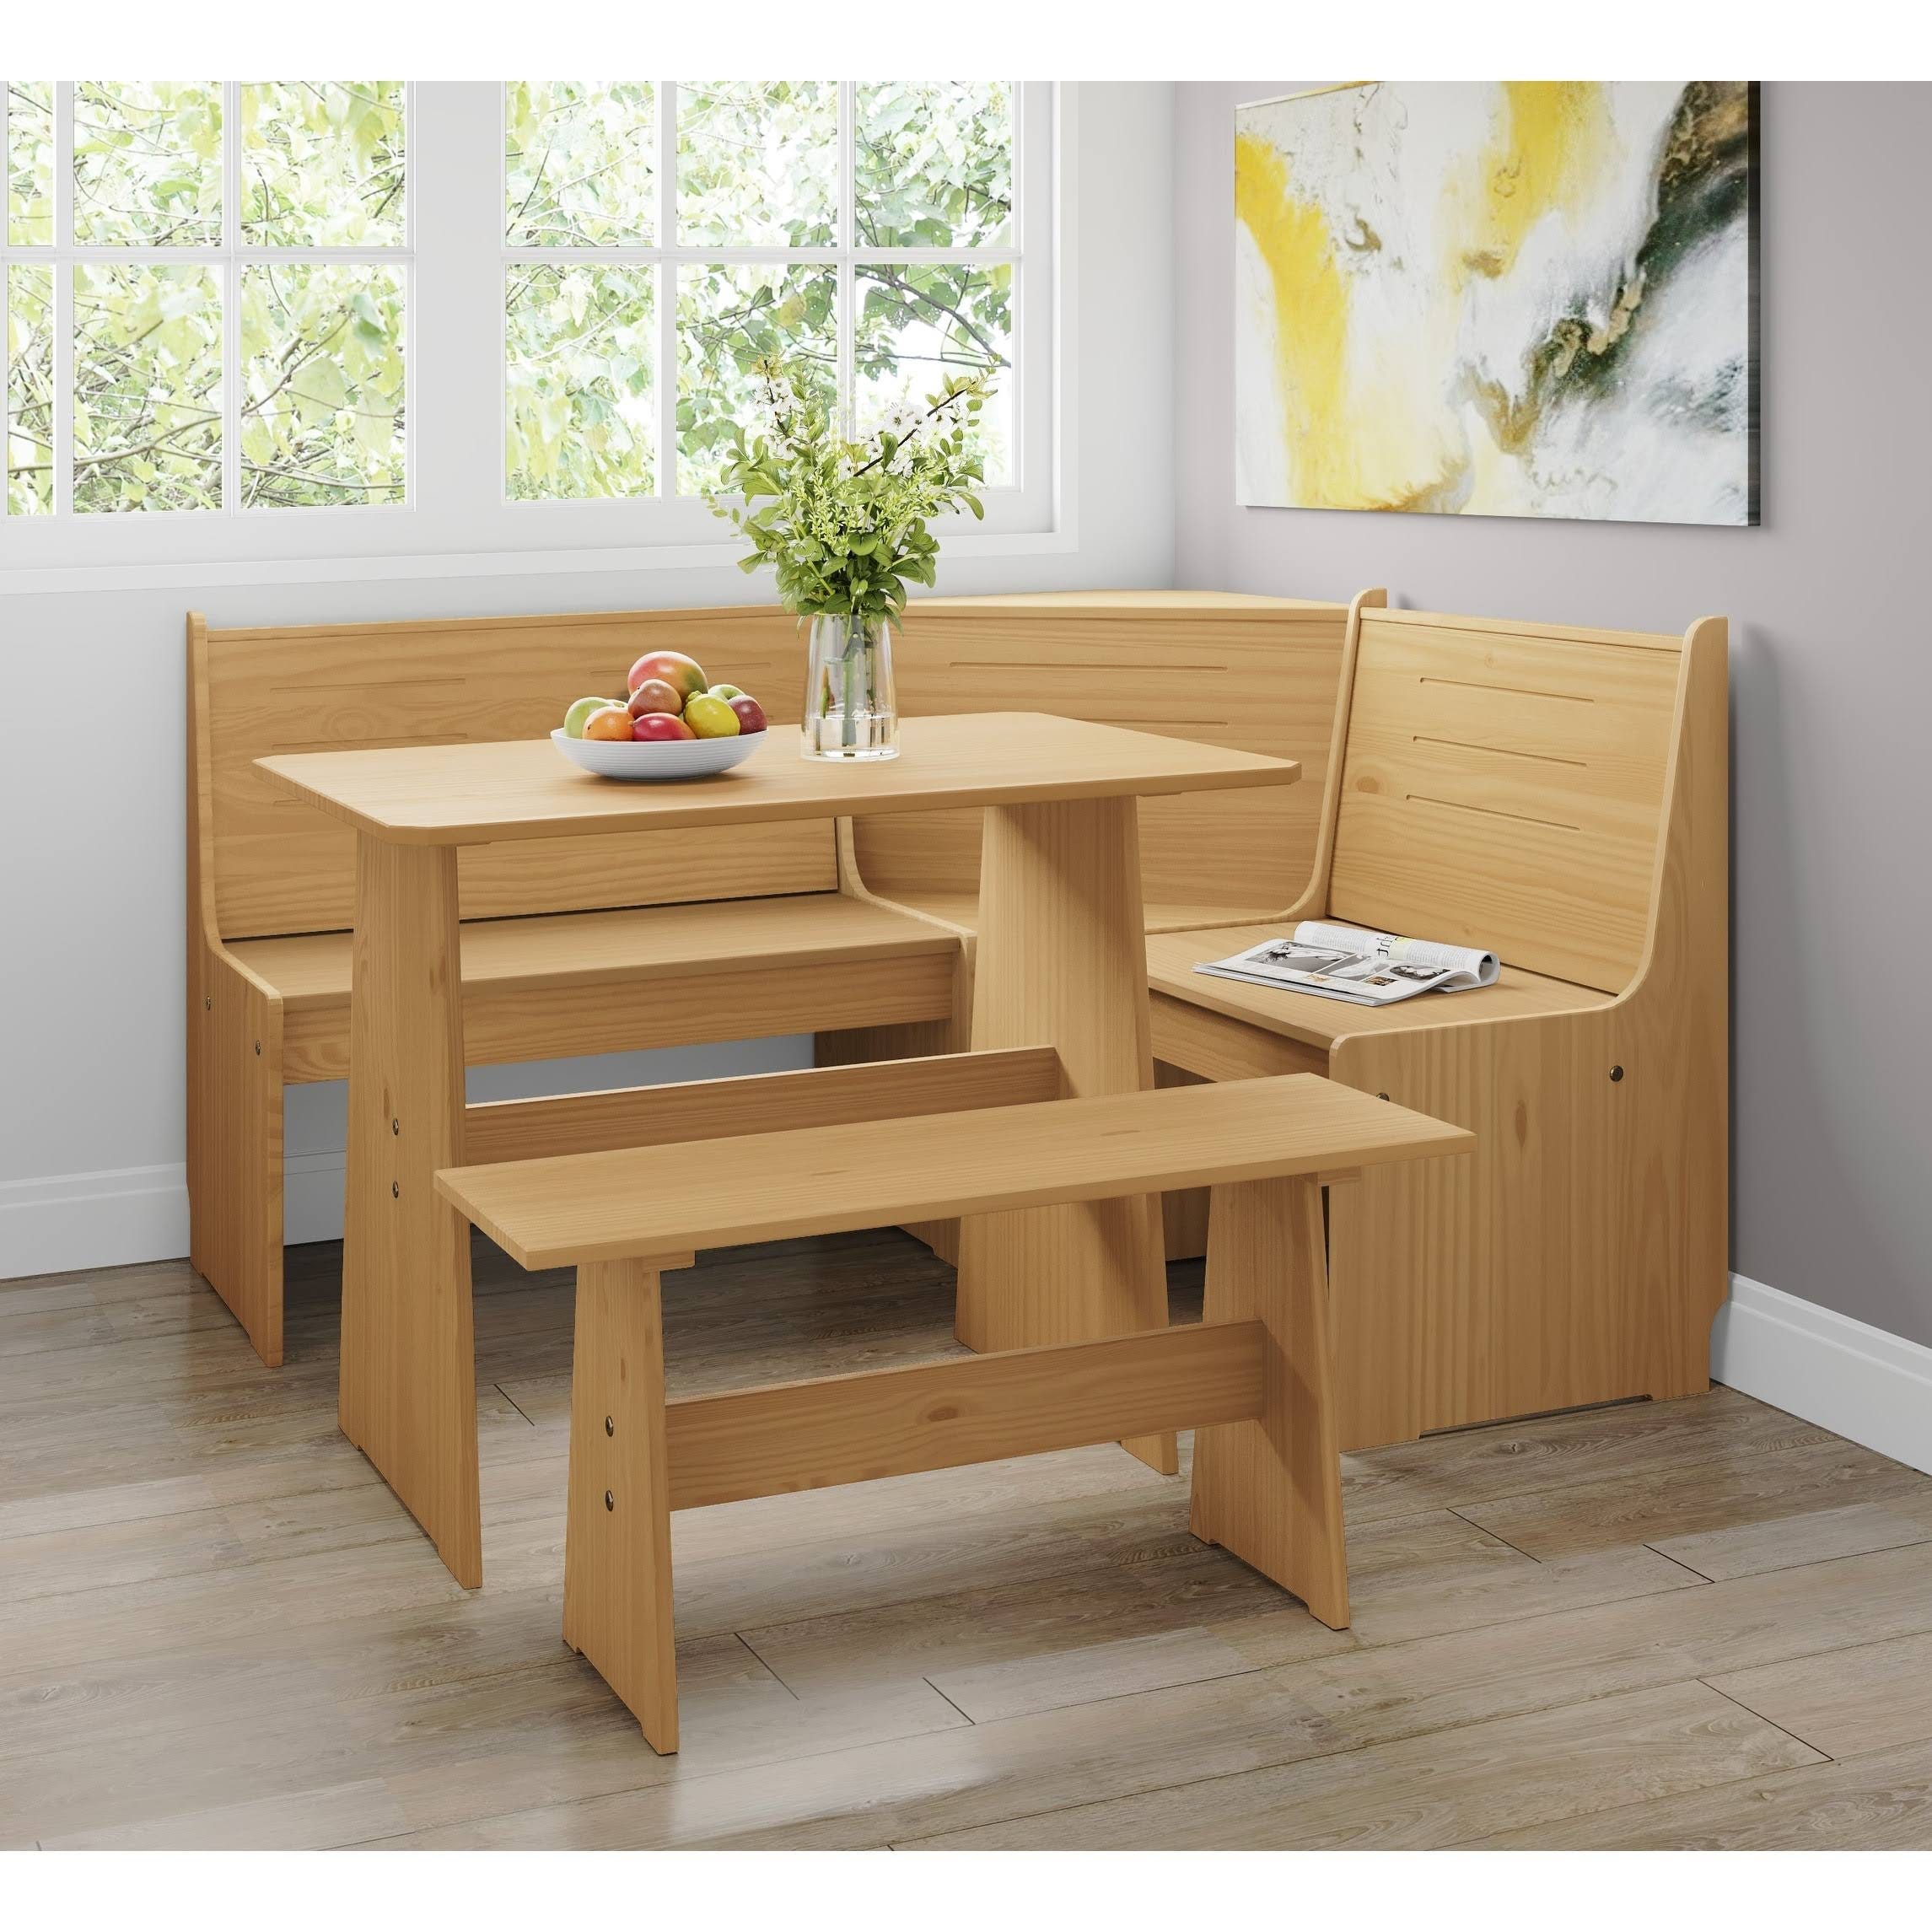 Dwell Home Inc. Natural Solid Wood Breakfast Nook Set | Image